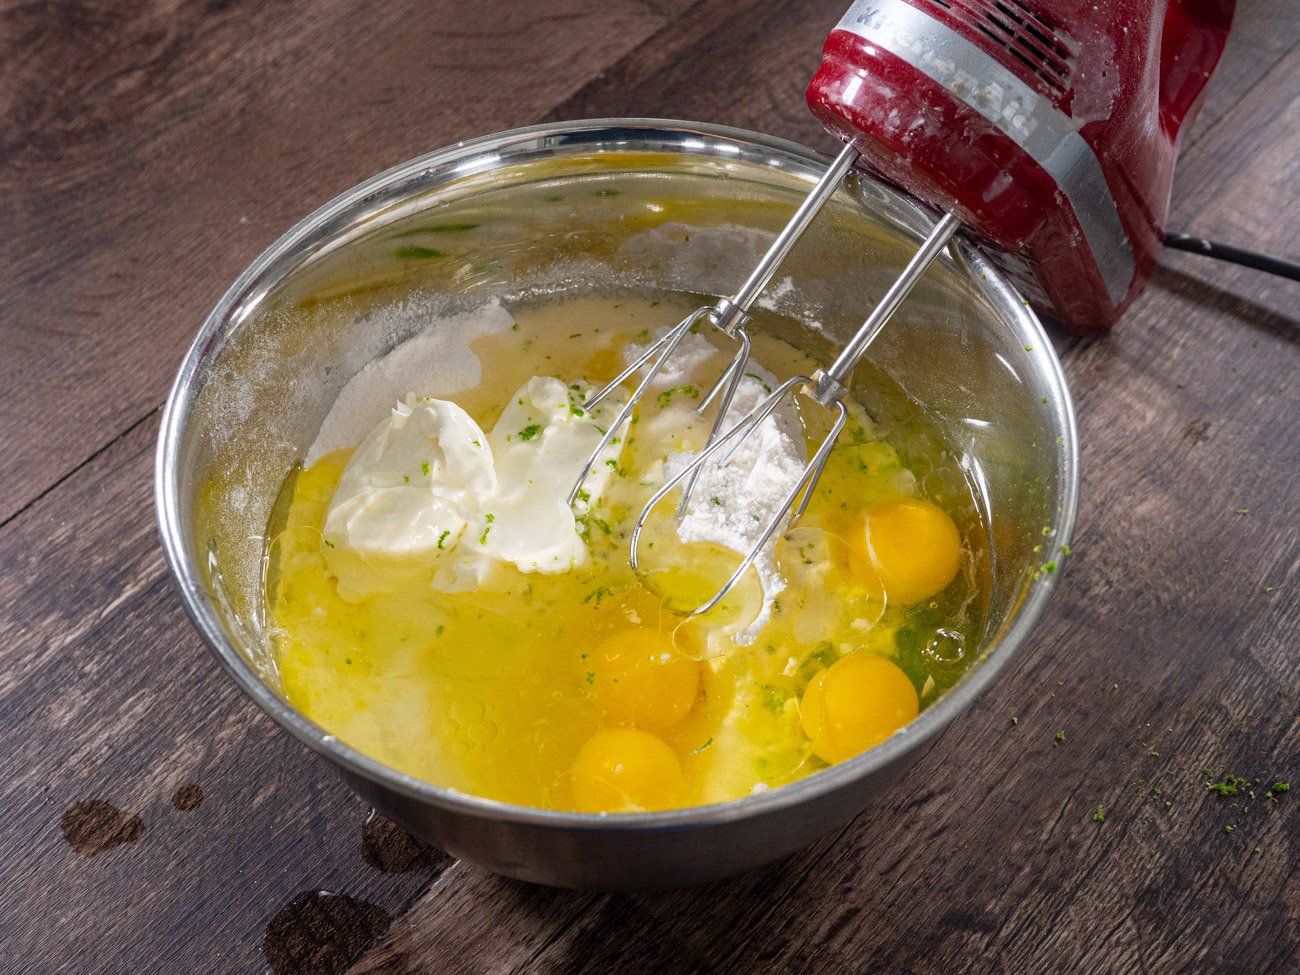 In a large bowl combine cake mix, pudding mix, eggs, sour cream, water, lime zest, and oil until well blended.